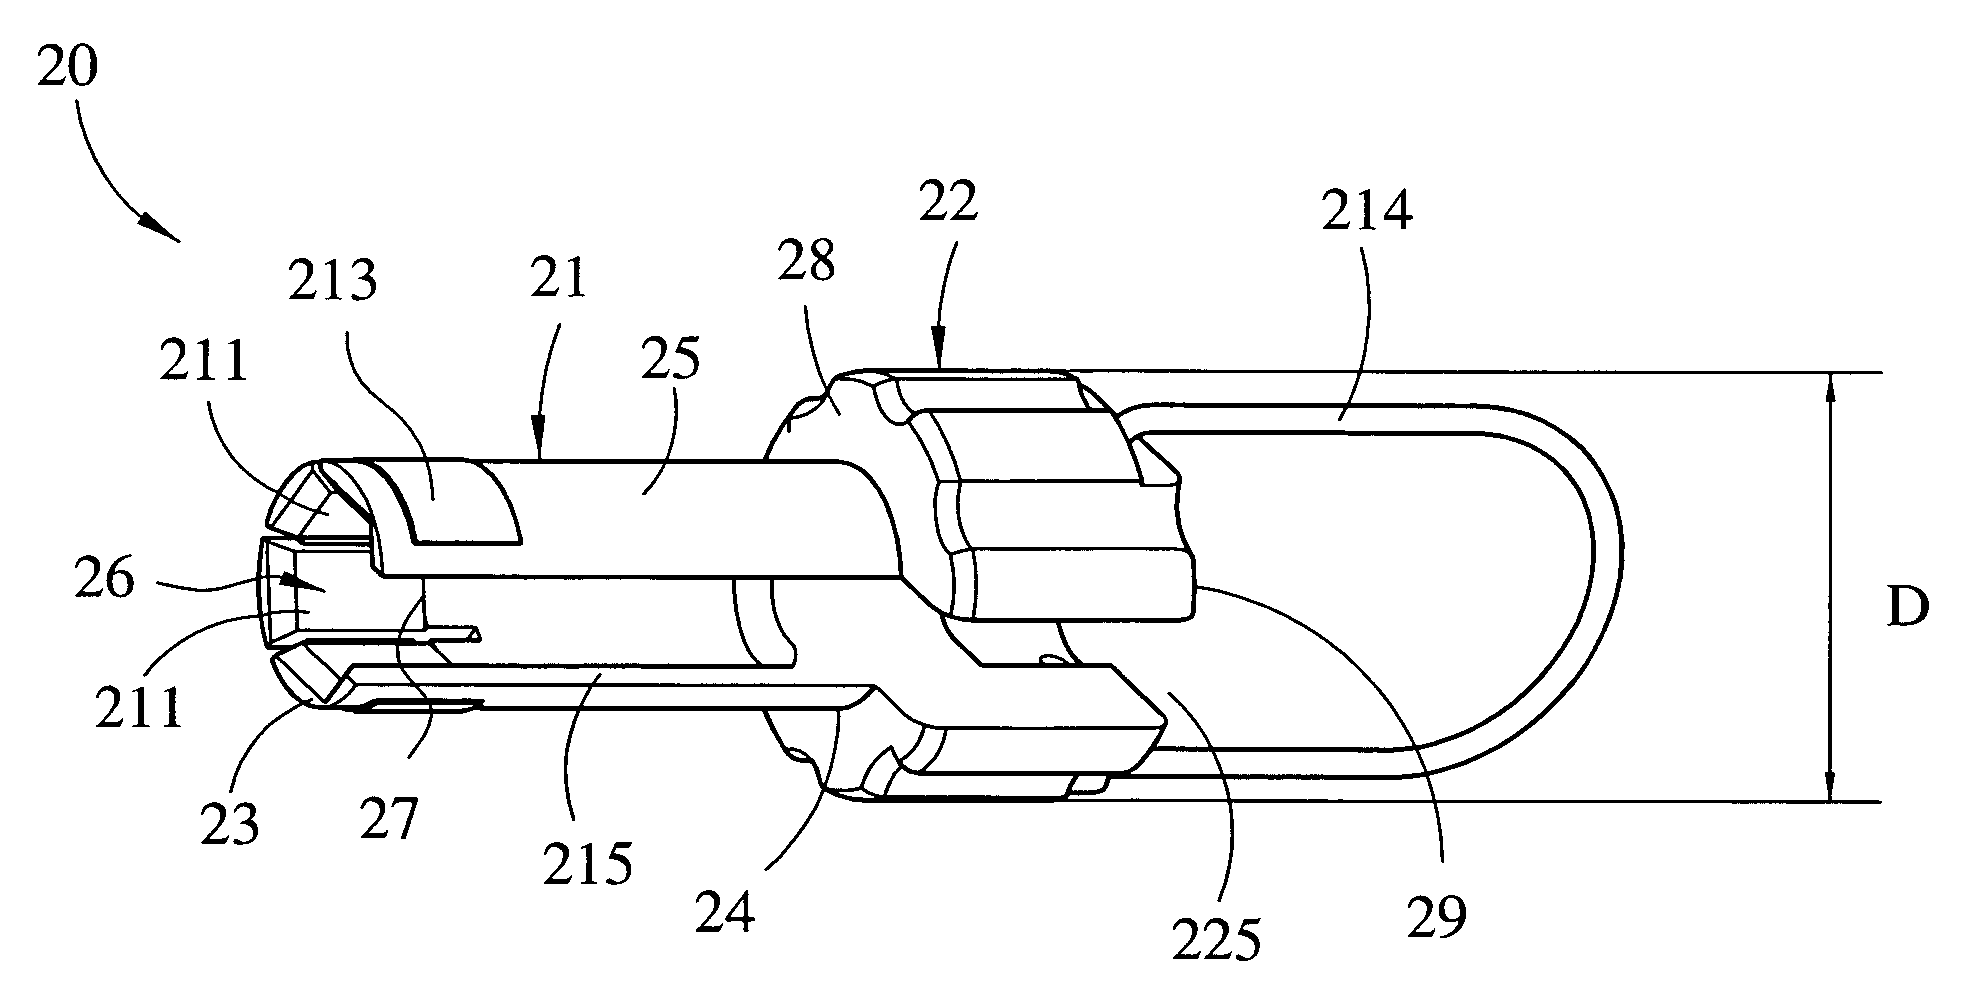 Tool operable for connecting a male F-type coaxial cable connector